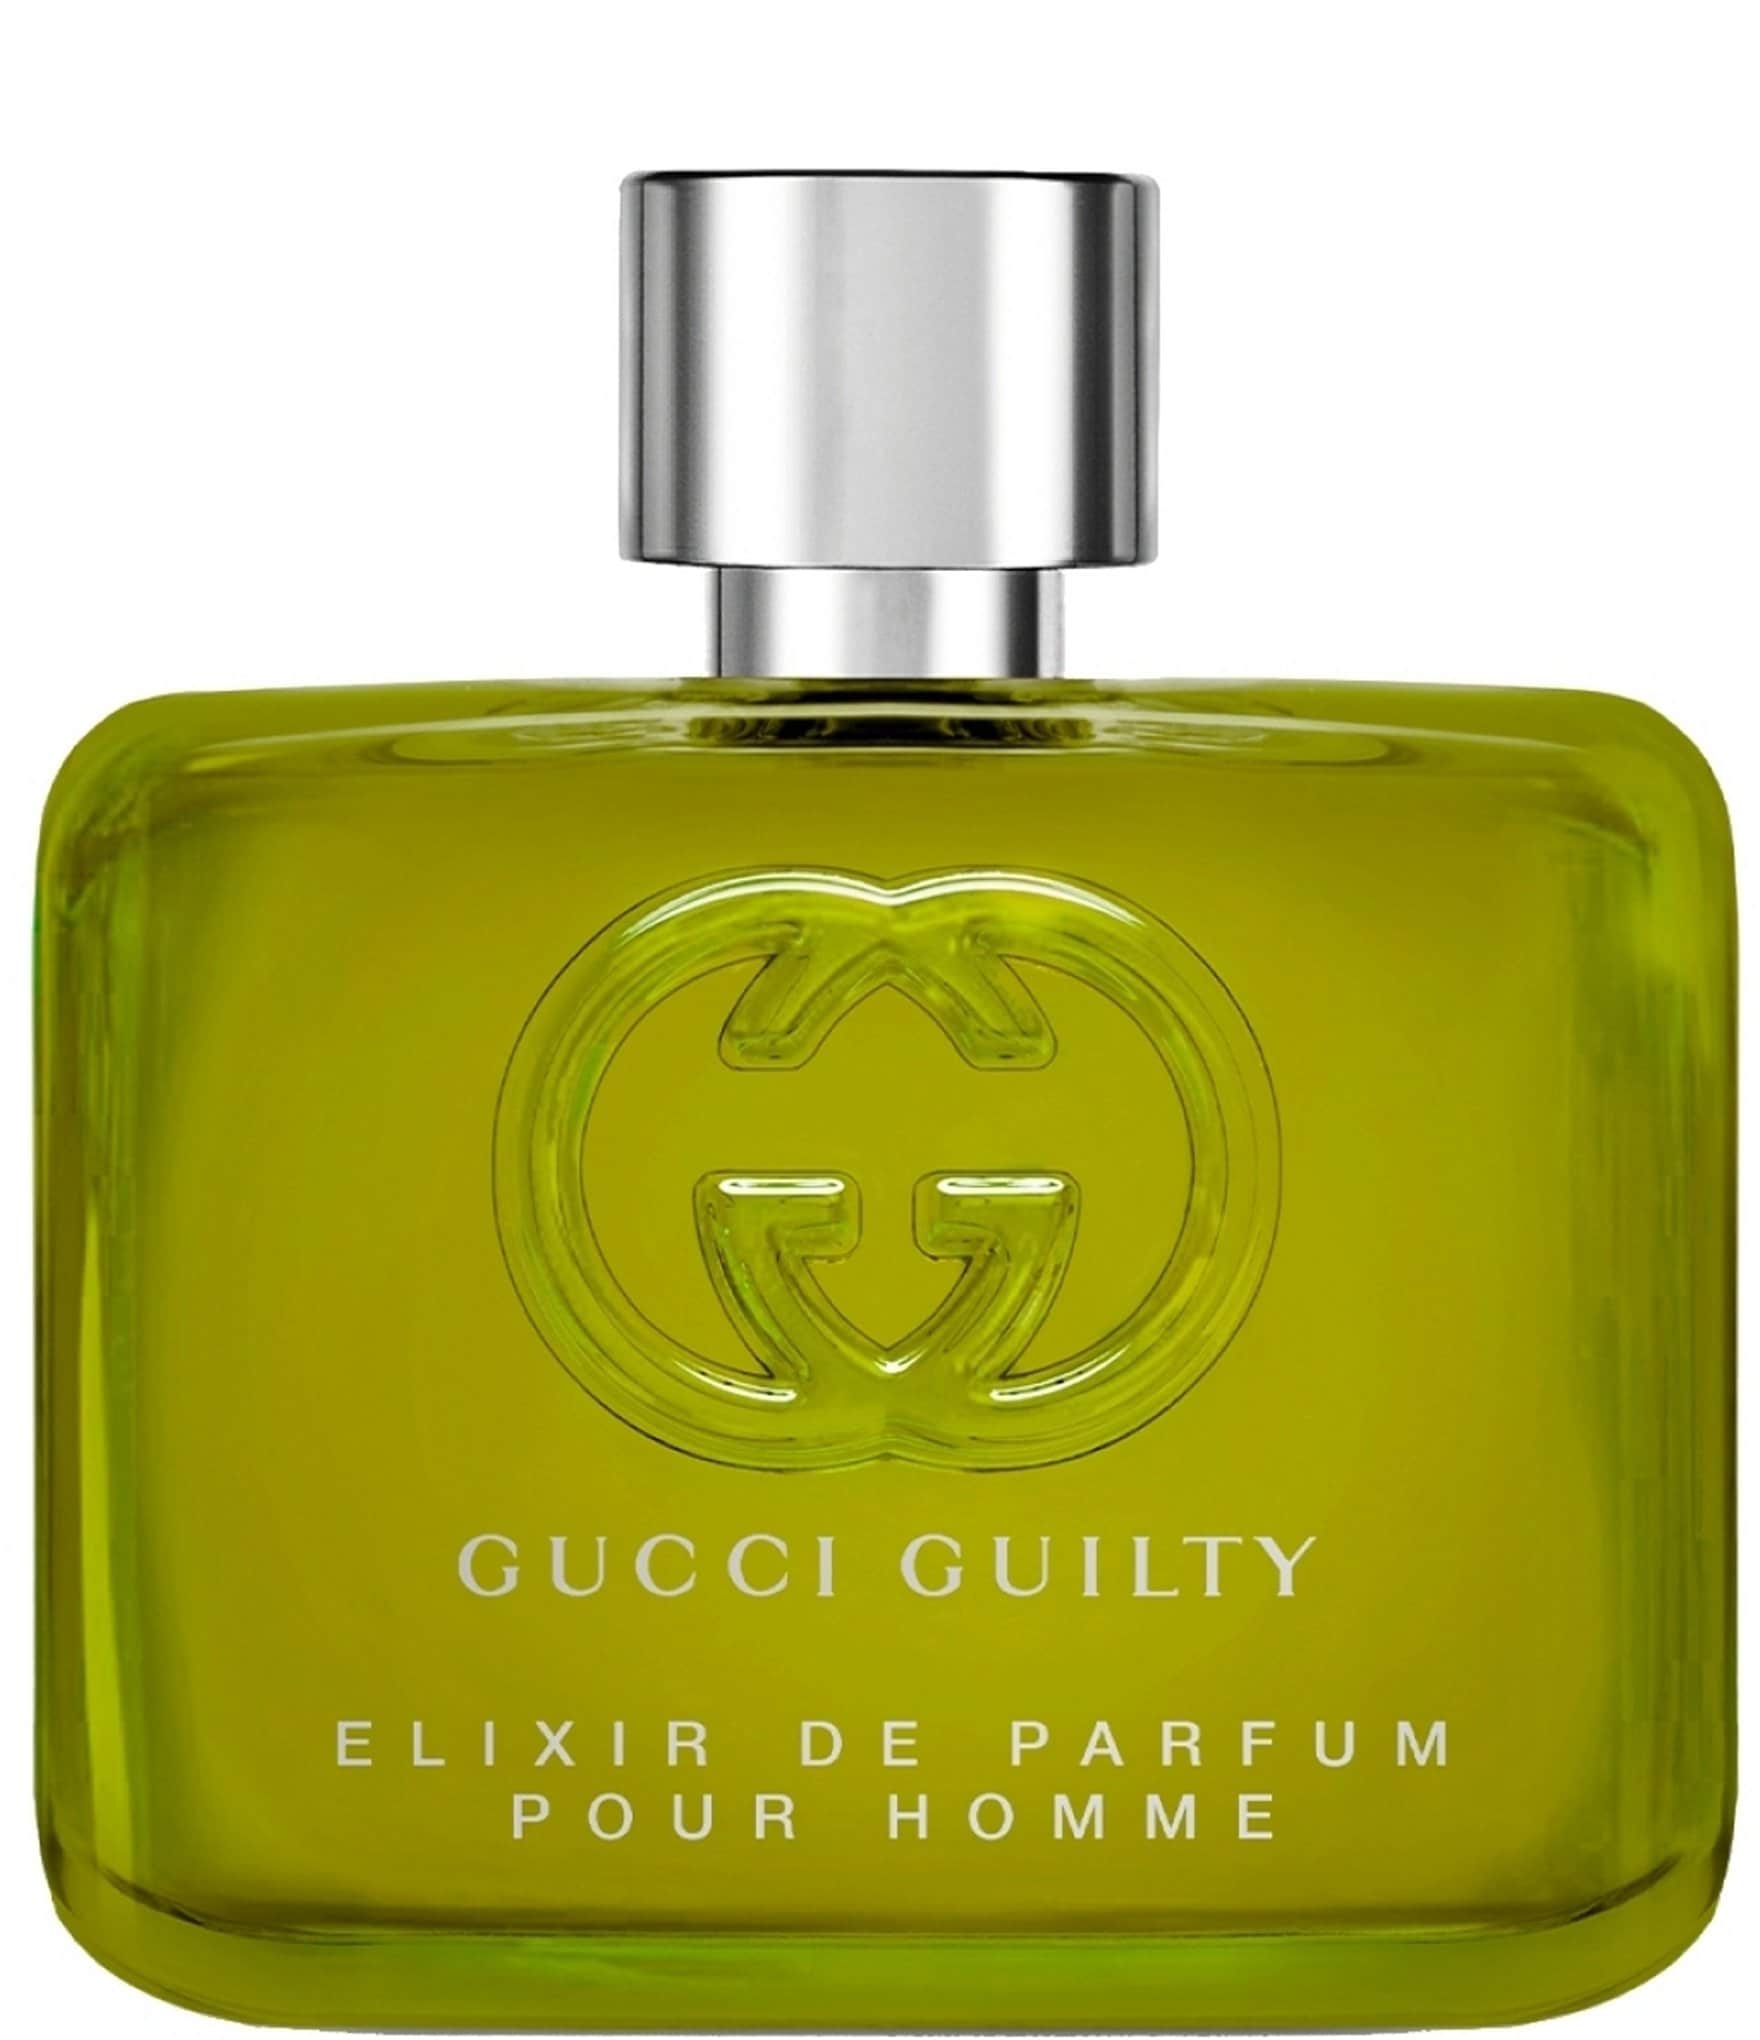 Gucci Guilty Black Cologne By Gucci for Men